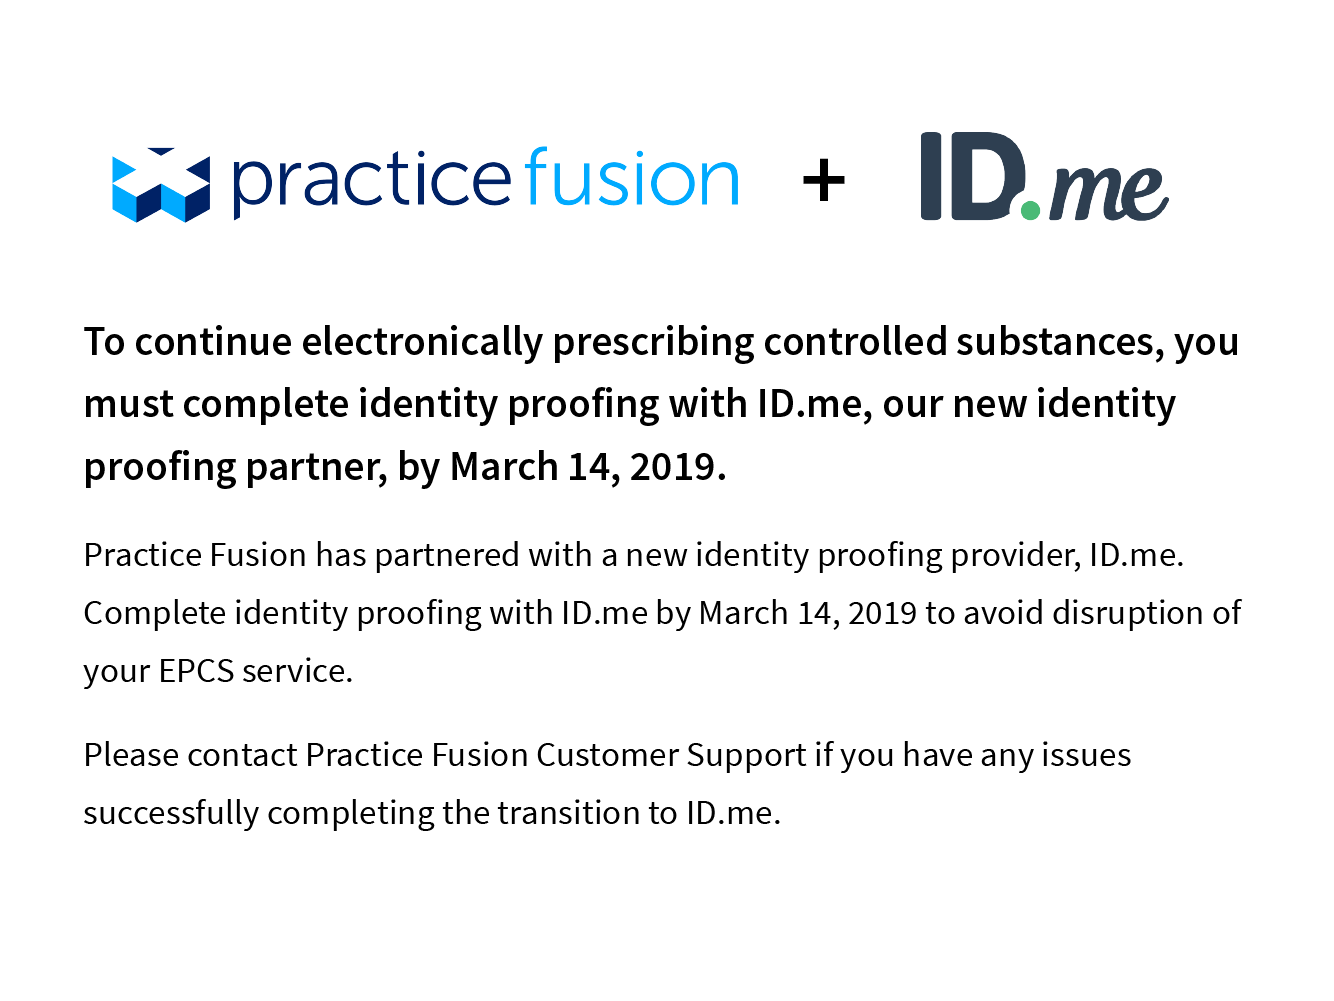 To continue electronically prescribing controlled substances, you must complete identity proofing with ID.me, our new identity proofing partner, by March 14,2019. Practice Fusion has partnered with a new identity proofing provider, ID.me. Compplete identity proofing with ID.me by March 14 to avoid disruption to your EPCS service. Please contact Customer Support if you have any issues successfully comnplete the transition to ID.me.